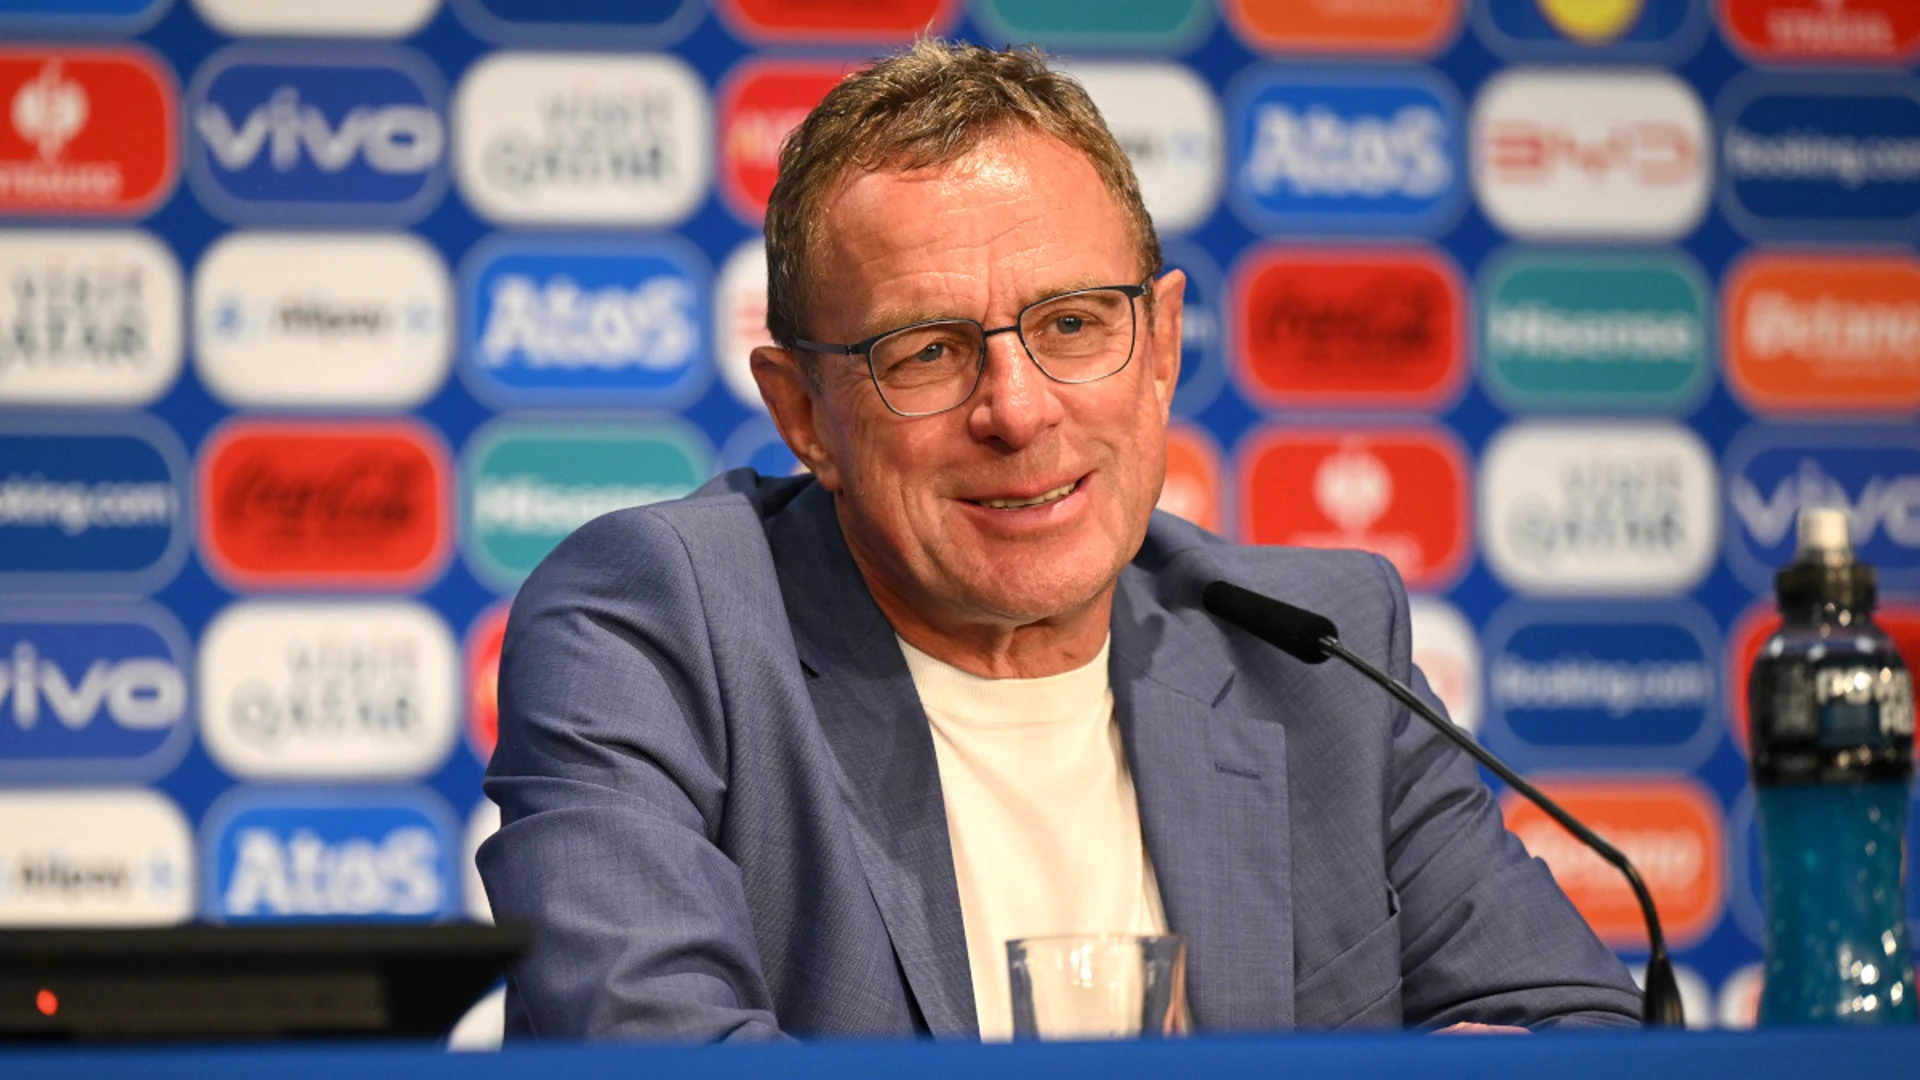 Austria glory at Euro 2024 'not impossible', says Rangnick